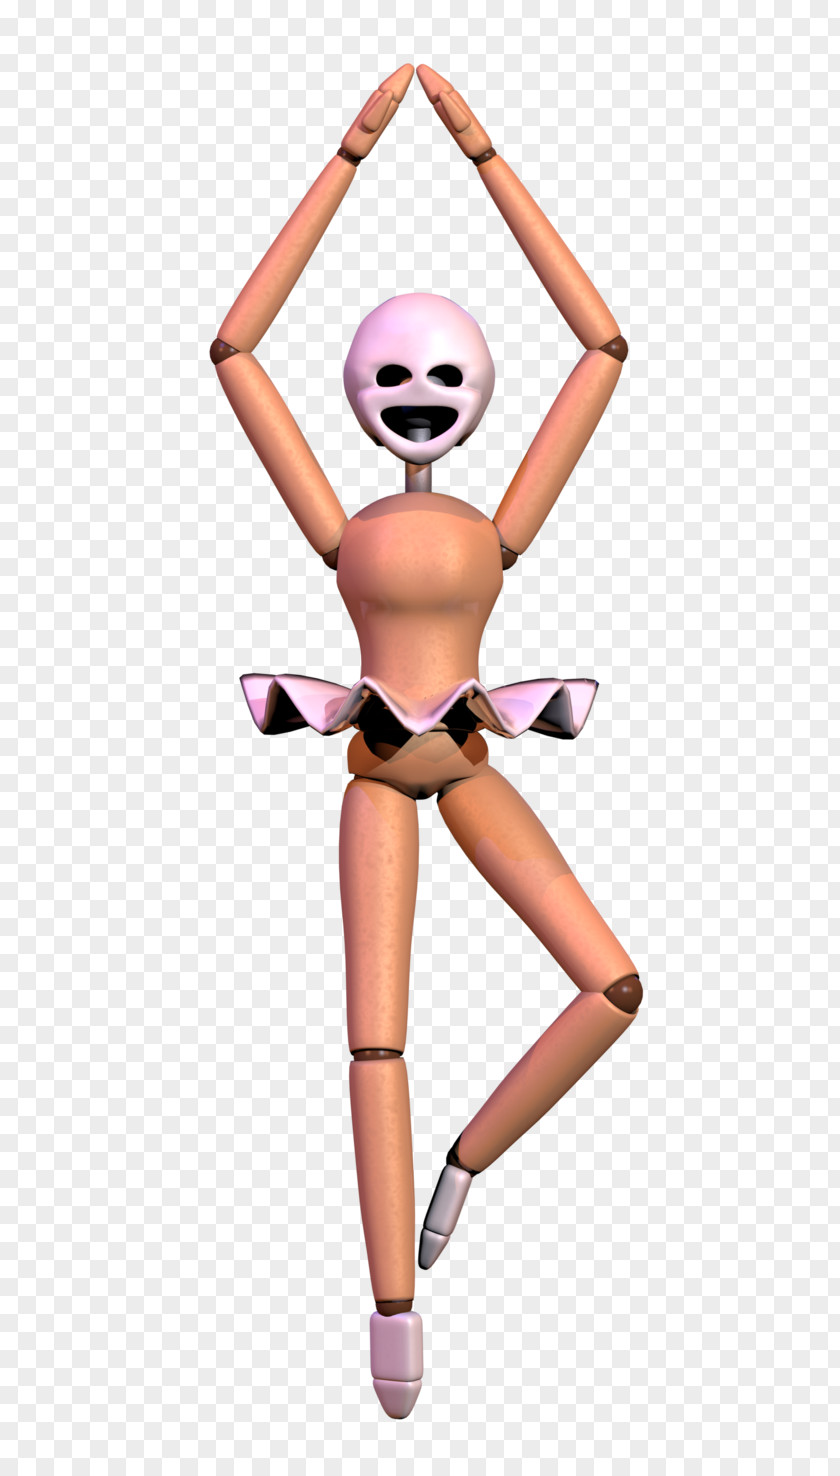 Five Nights At Freddy's: Sister Location Finger Human Body Endoskeleton Toe PNG